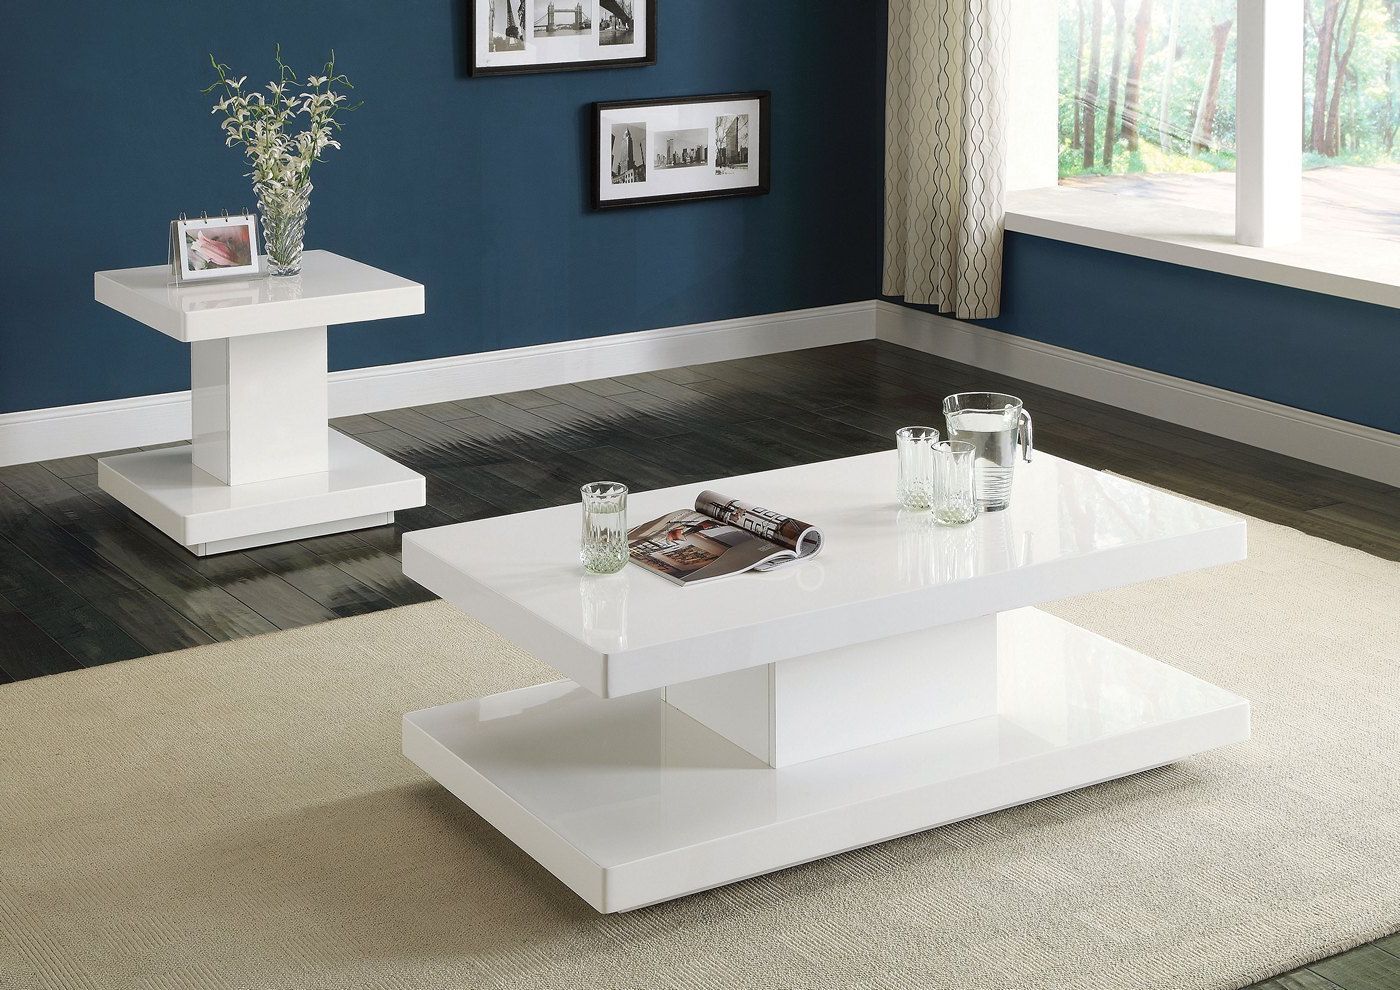 Preferred Ifama Contemporary End Table In White High Gloss Lacquer Pertaining To Gloss White Steel Coffee Tables (View 1 of 20)